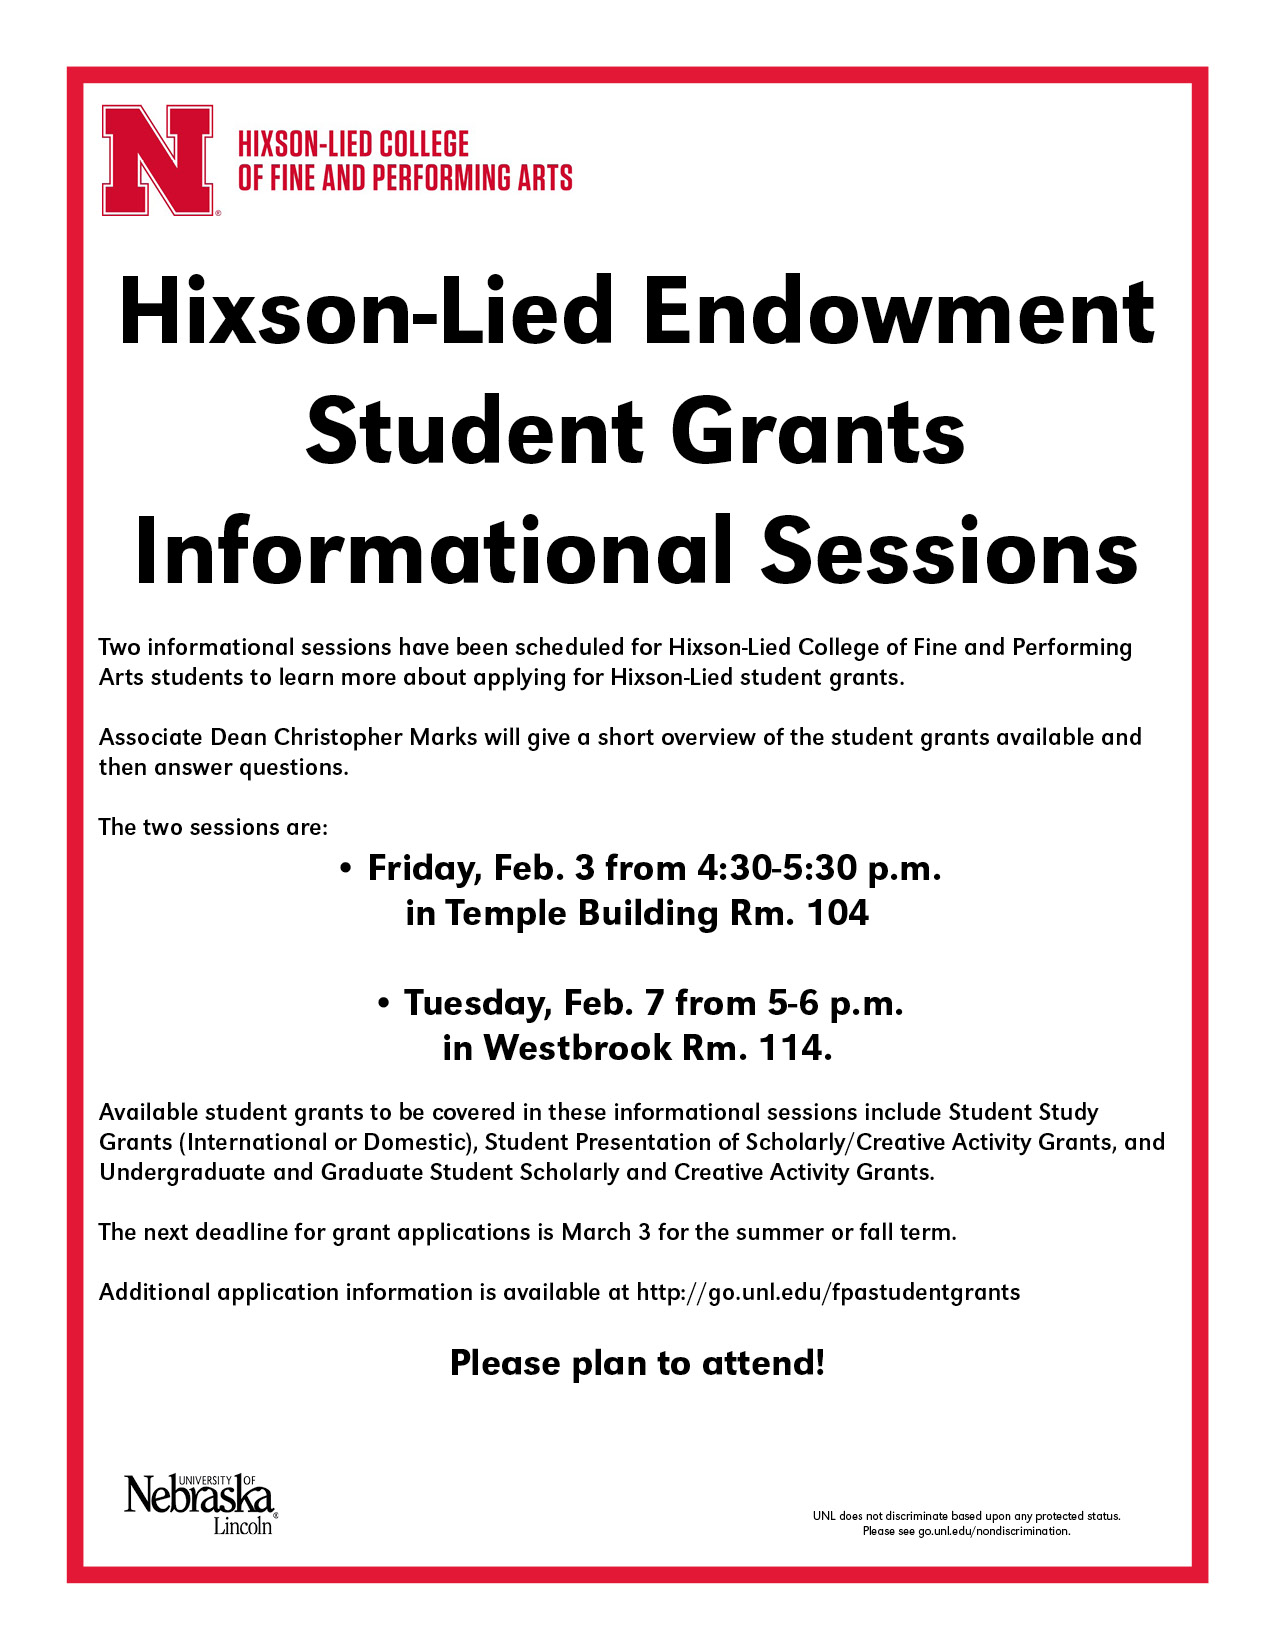 Hixson-Lied Endowment student grants information sessions will be held Feb. 3 and 7.